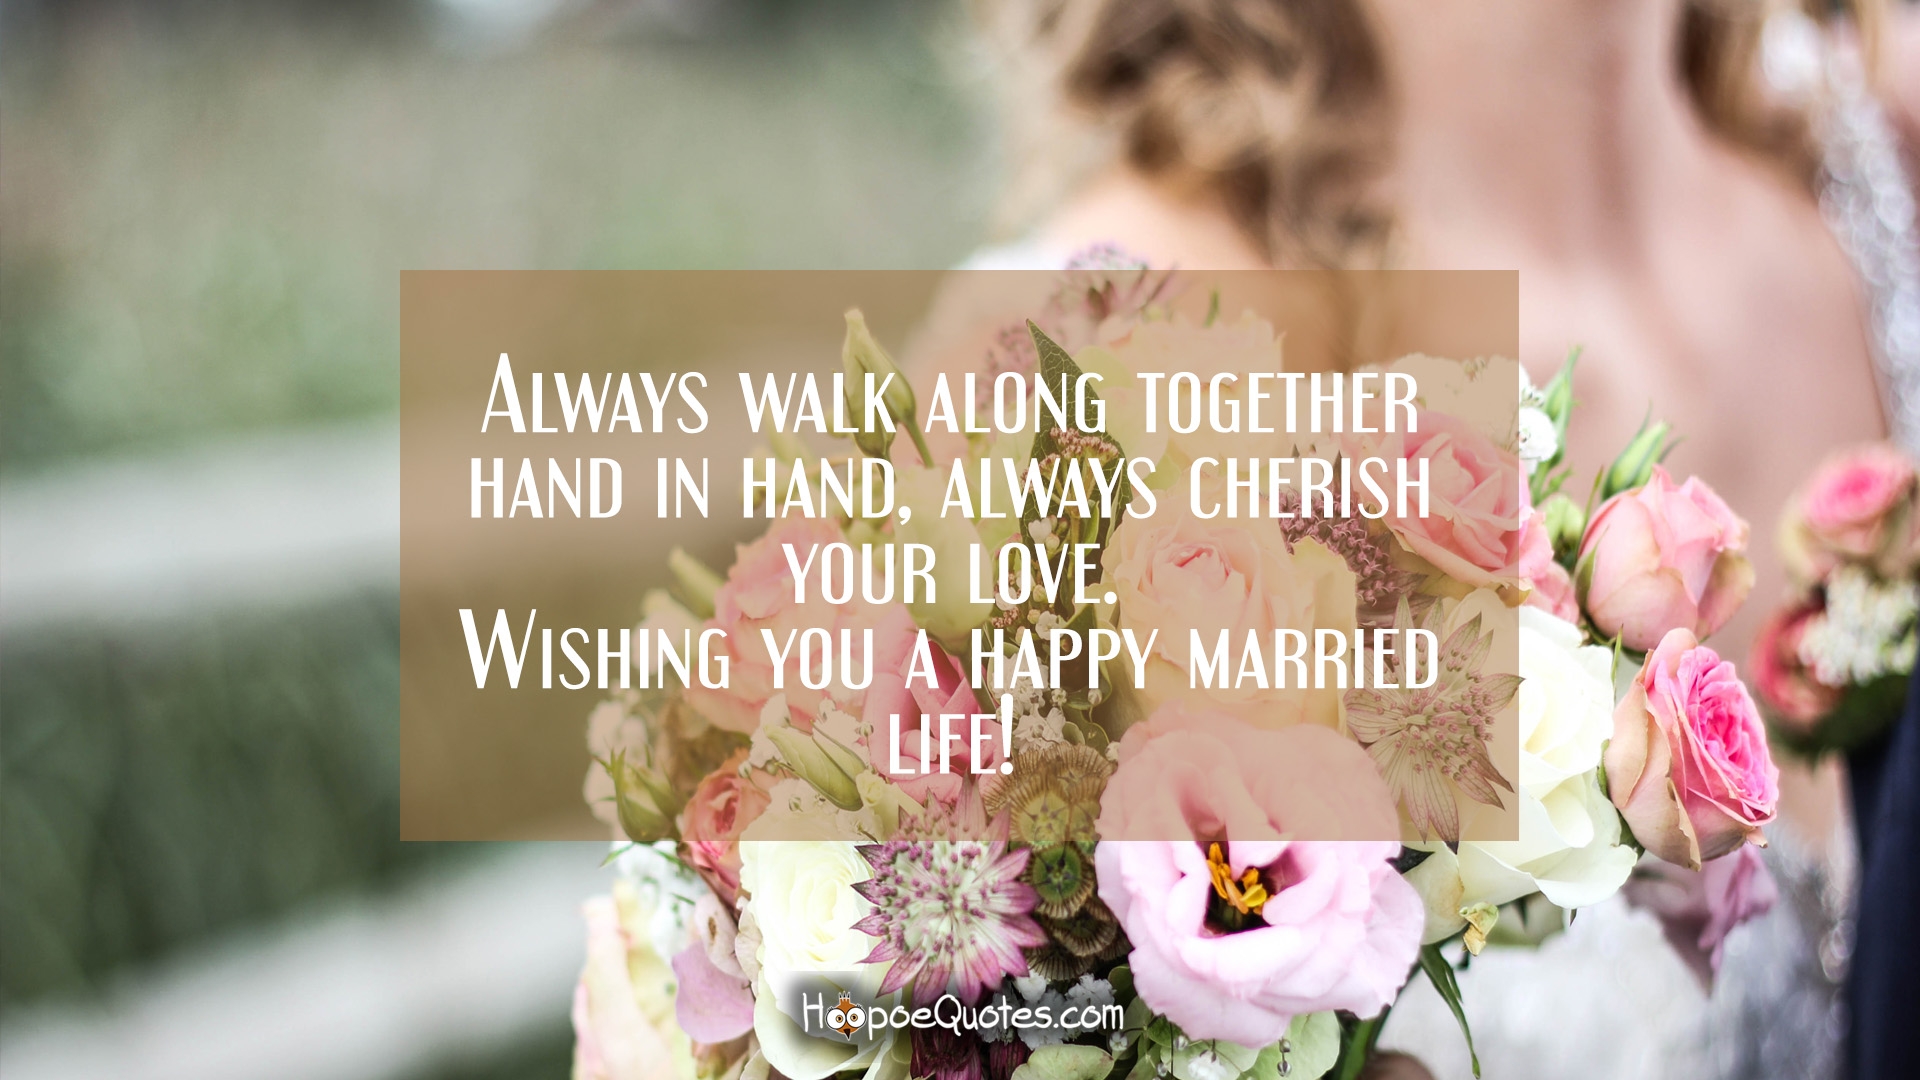 Beautiful Happy Married Life Quotes - 1920x1080 Wallpaper 